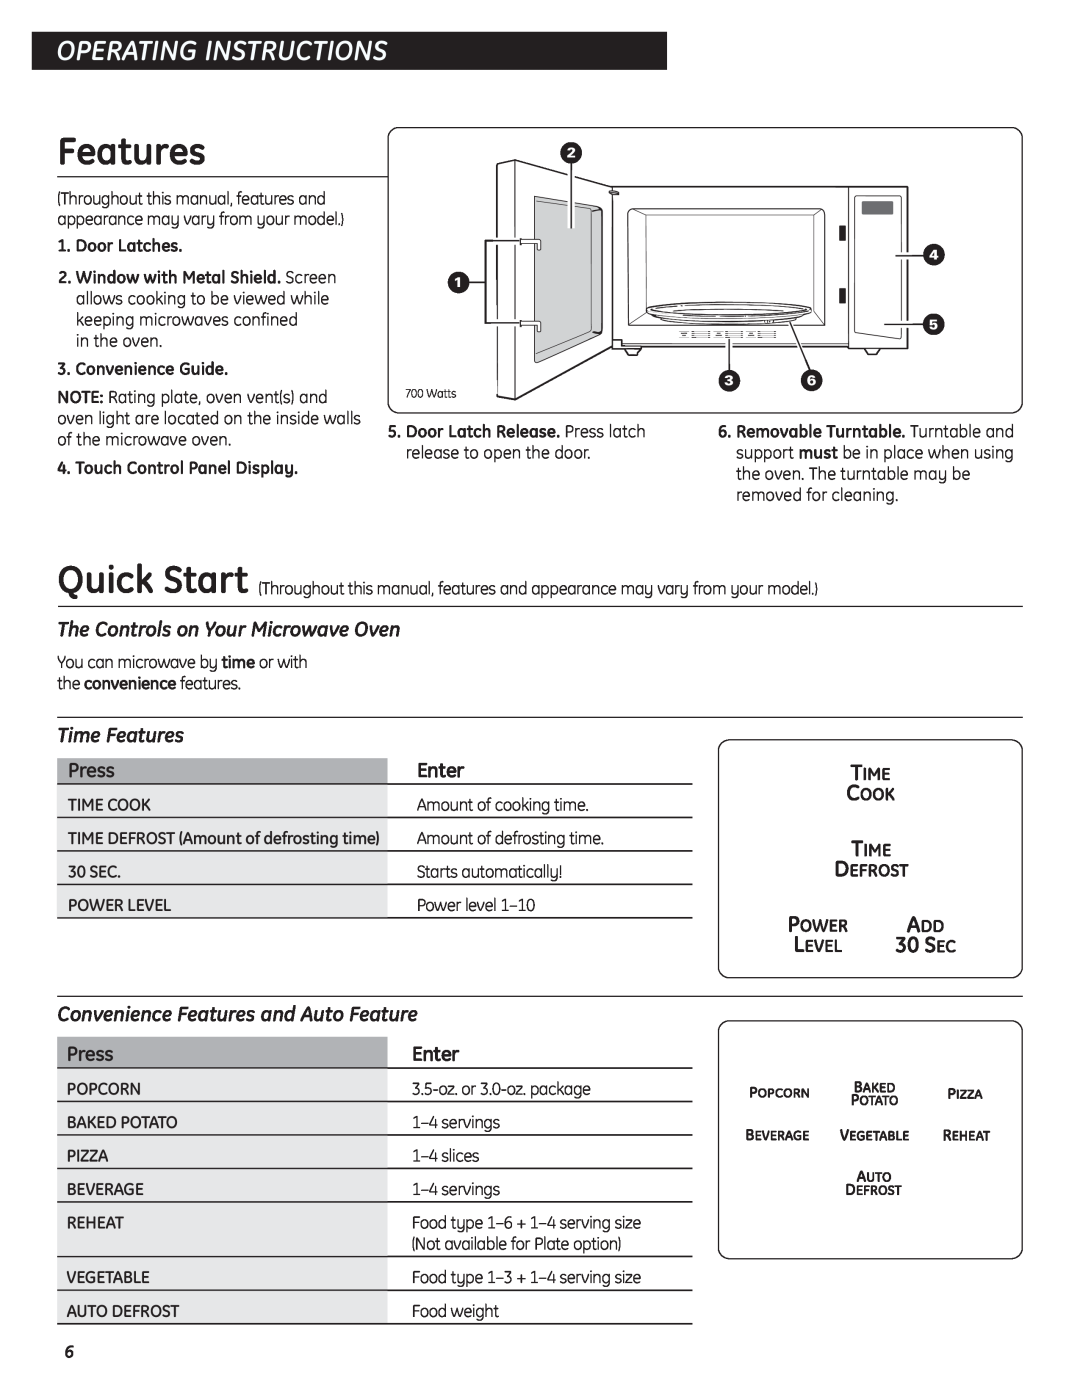 GE JES737 Operating Instructions, The Controls on Your Microwave Oven, Time Features, Enter, Press, Door Latches 